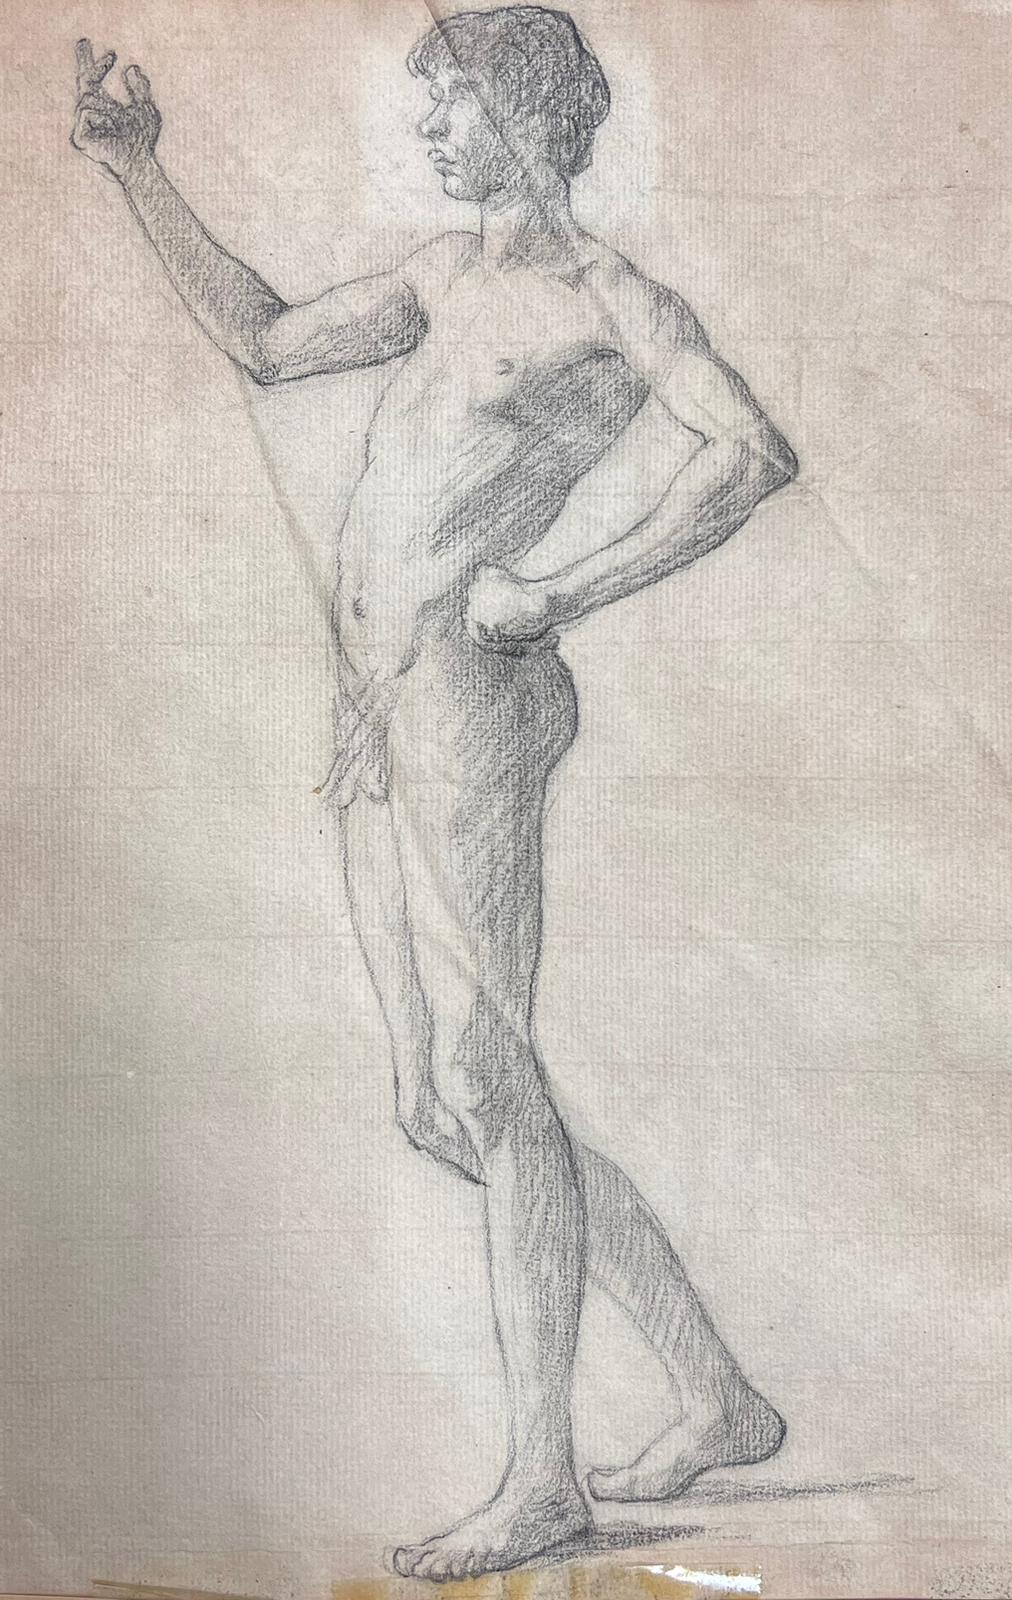 The Artists Model
Portrait of a Young Male Nude
French, late 19th century
pencil drawing on artist paper, unframed
with further sketches verso
artist paper: 13 x 9.5 inches
provenance: private collection, France
condition: overall good and sound